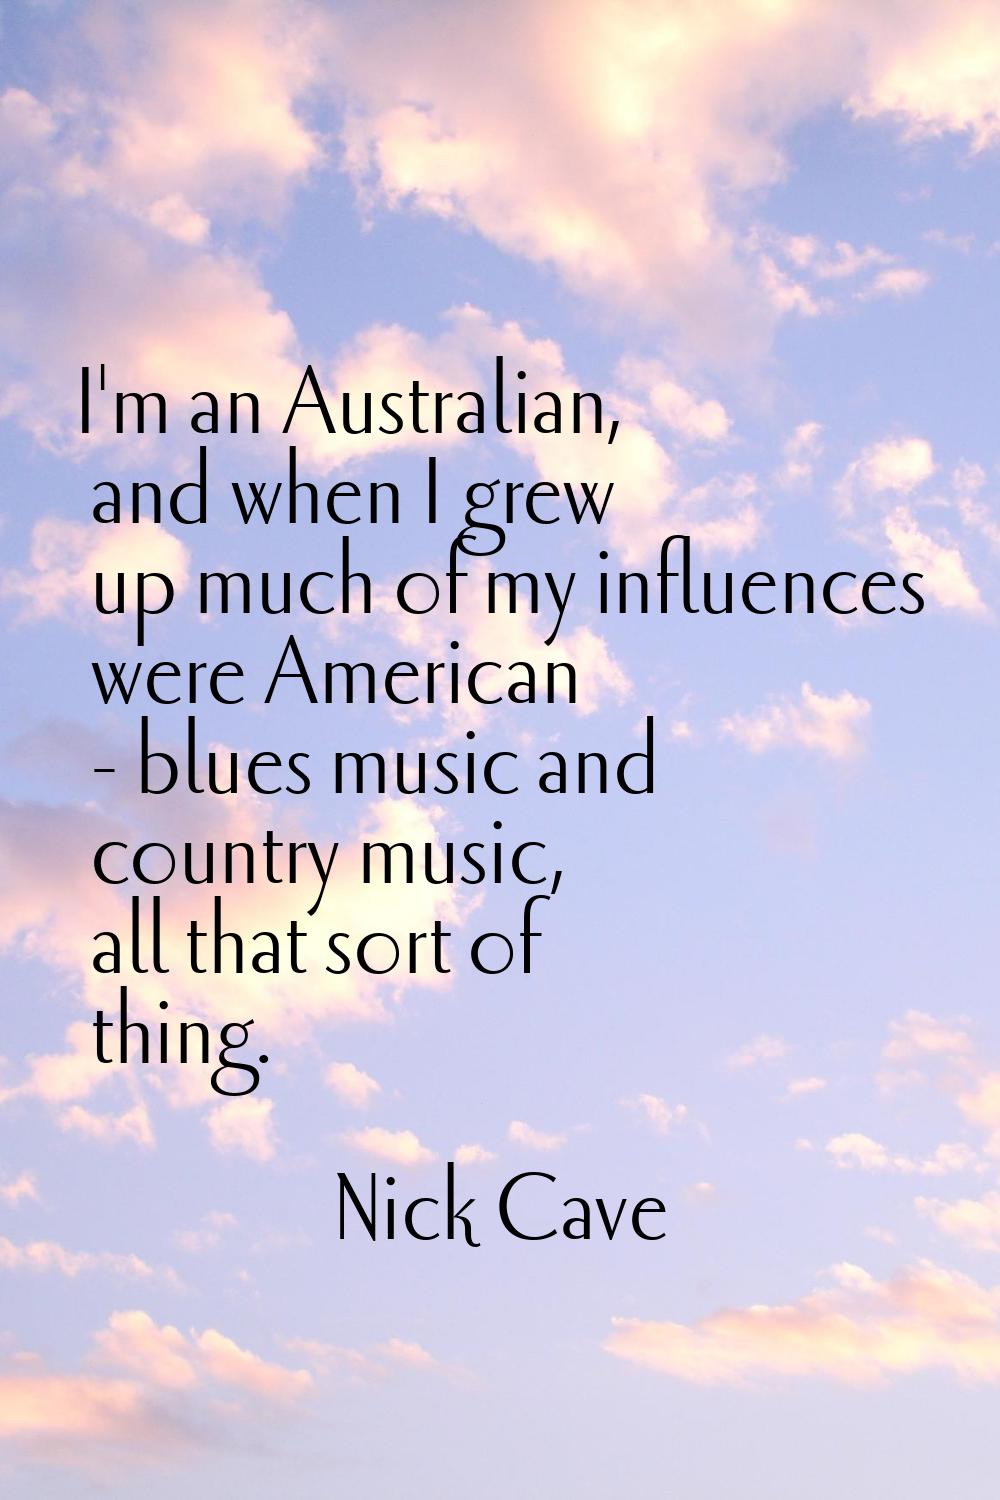 I'm an Australian, and when I grew up much of my influences were American - blues music and country